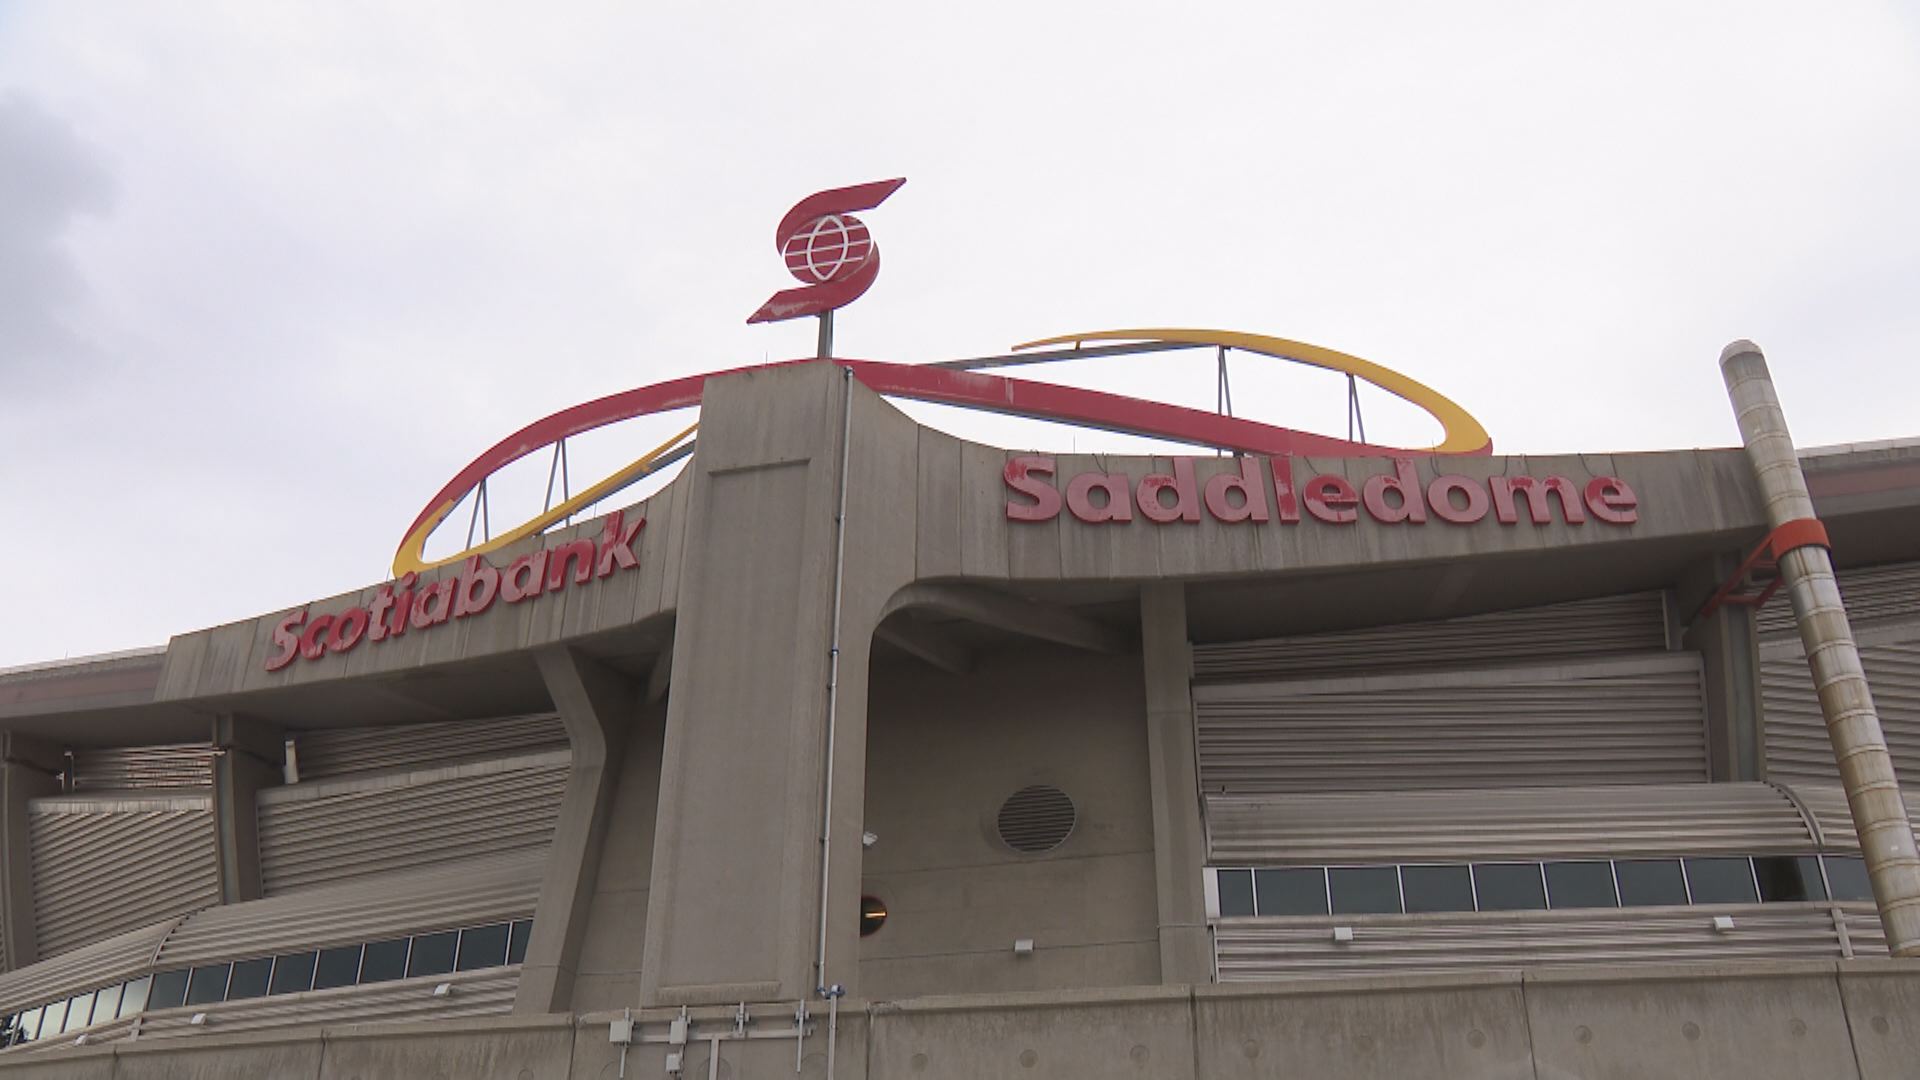 THE SCOTIABANK SADDLEDOME - All You Need to Know BEFORE You Go